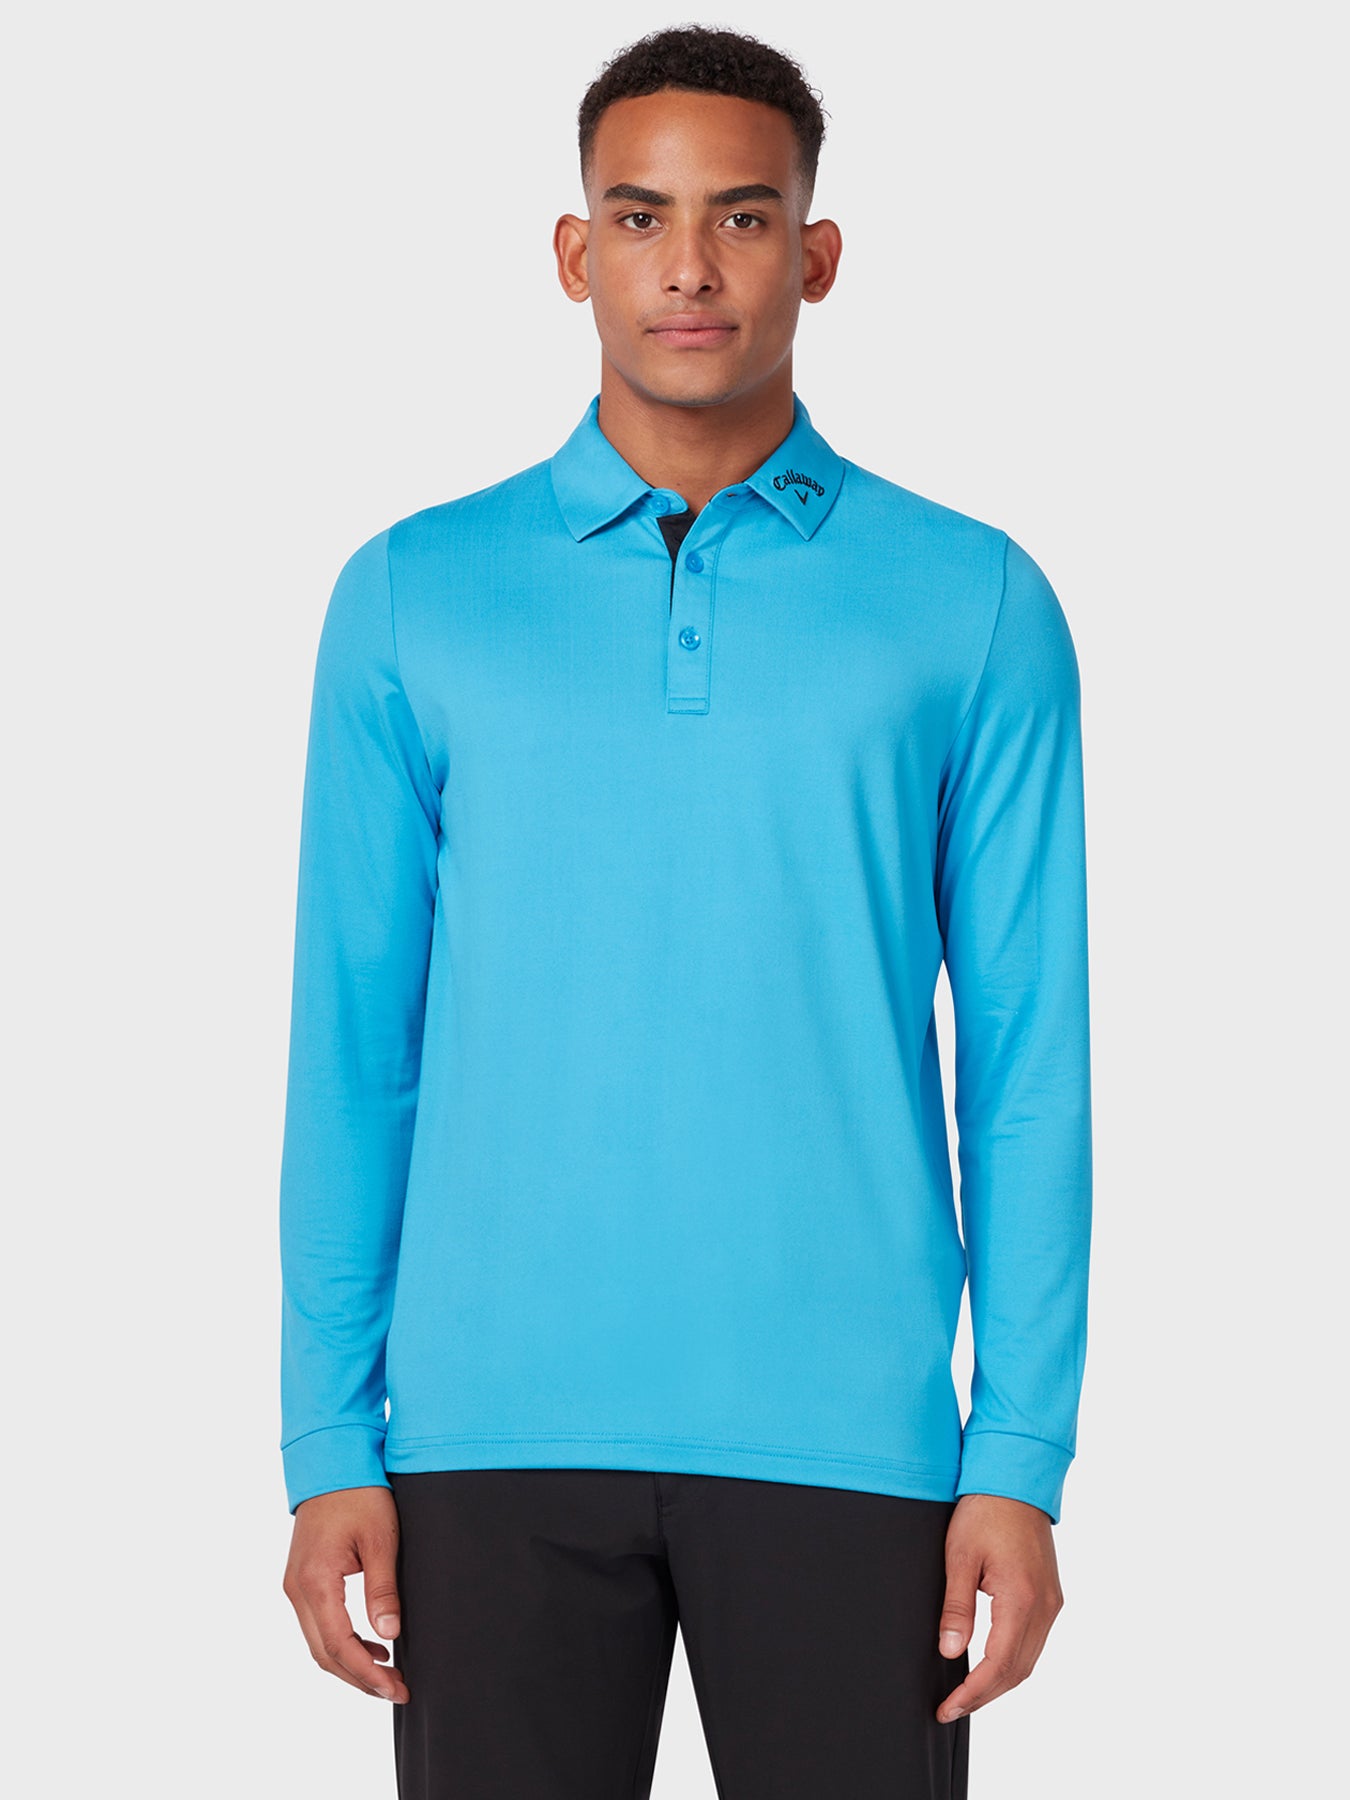 View Long Sleeve Performance Polo In Malibu Blue information